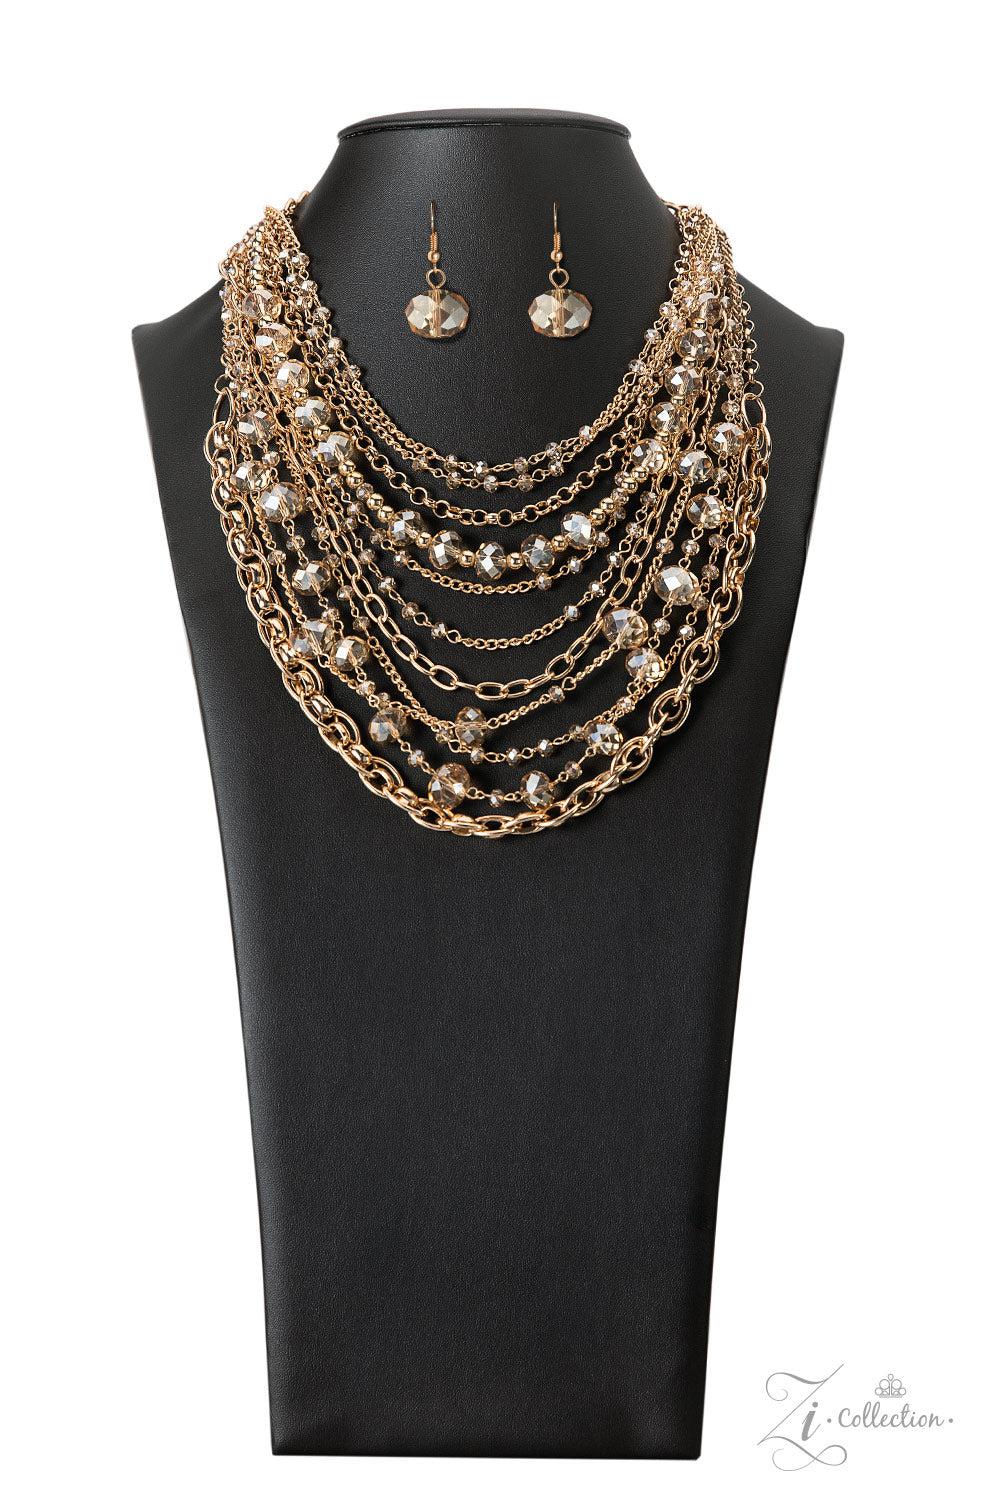 Reminiscent 2022 Zi Collection Necklace - Paparazzi Accessories- lightbox - CarasShop.com - $5 Jewelry by Cara Jewels